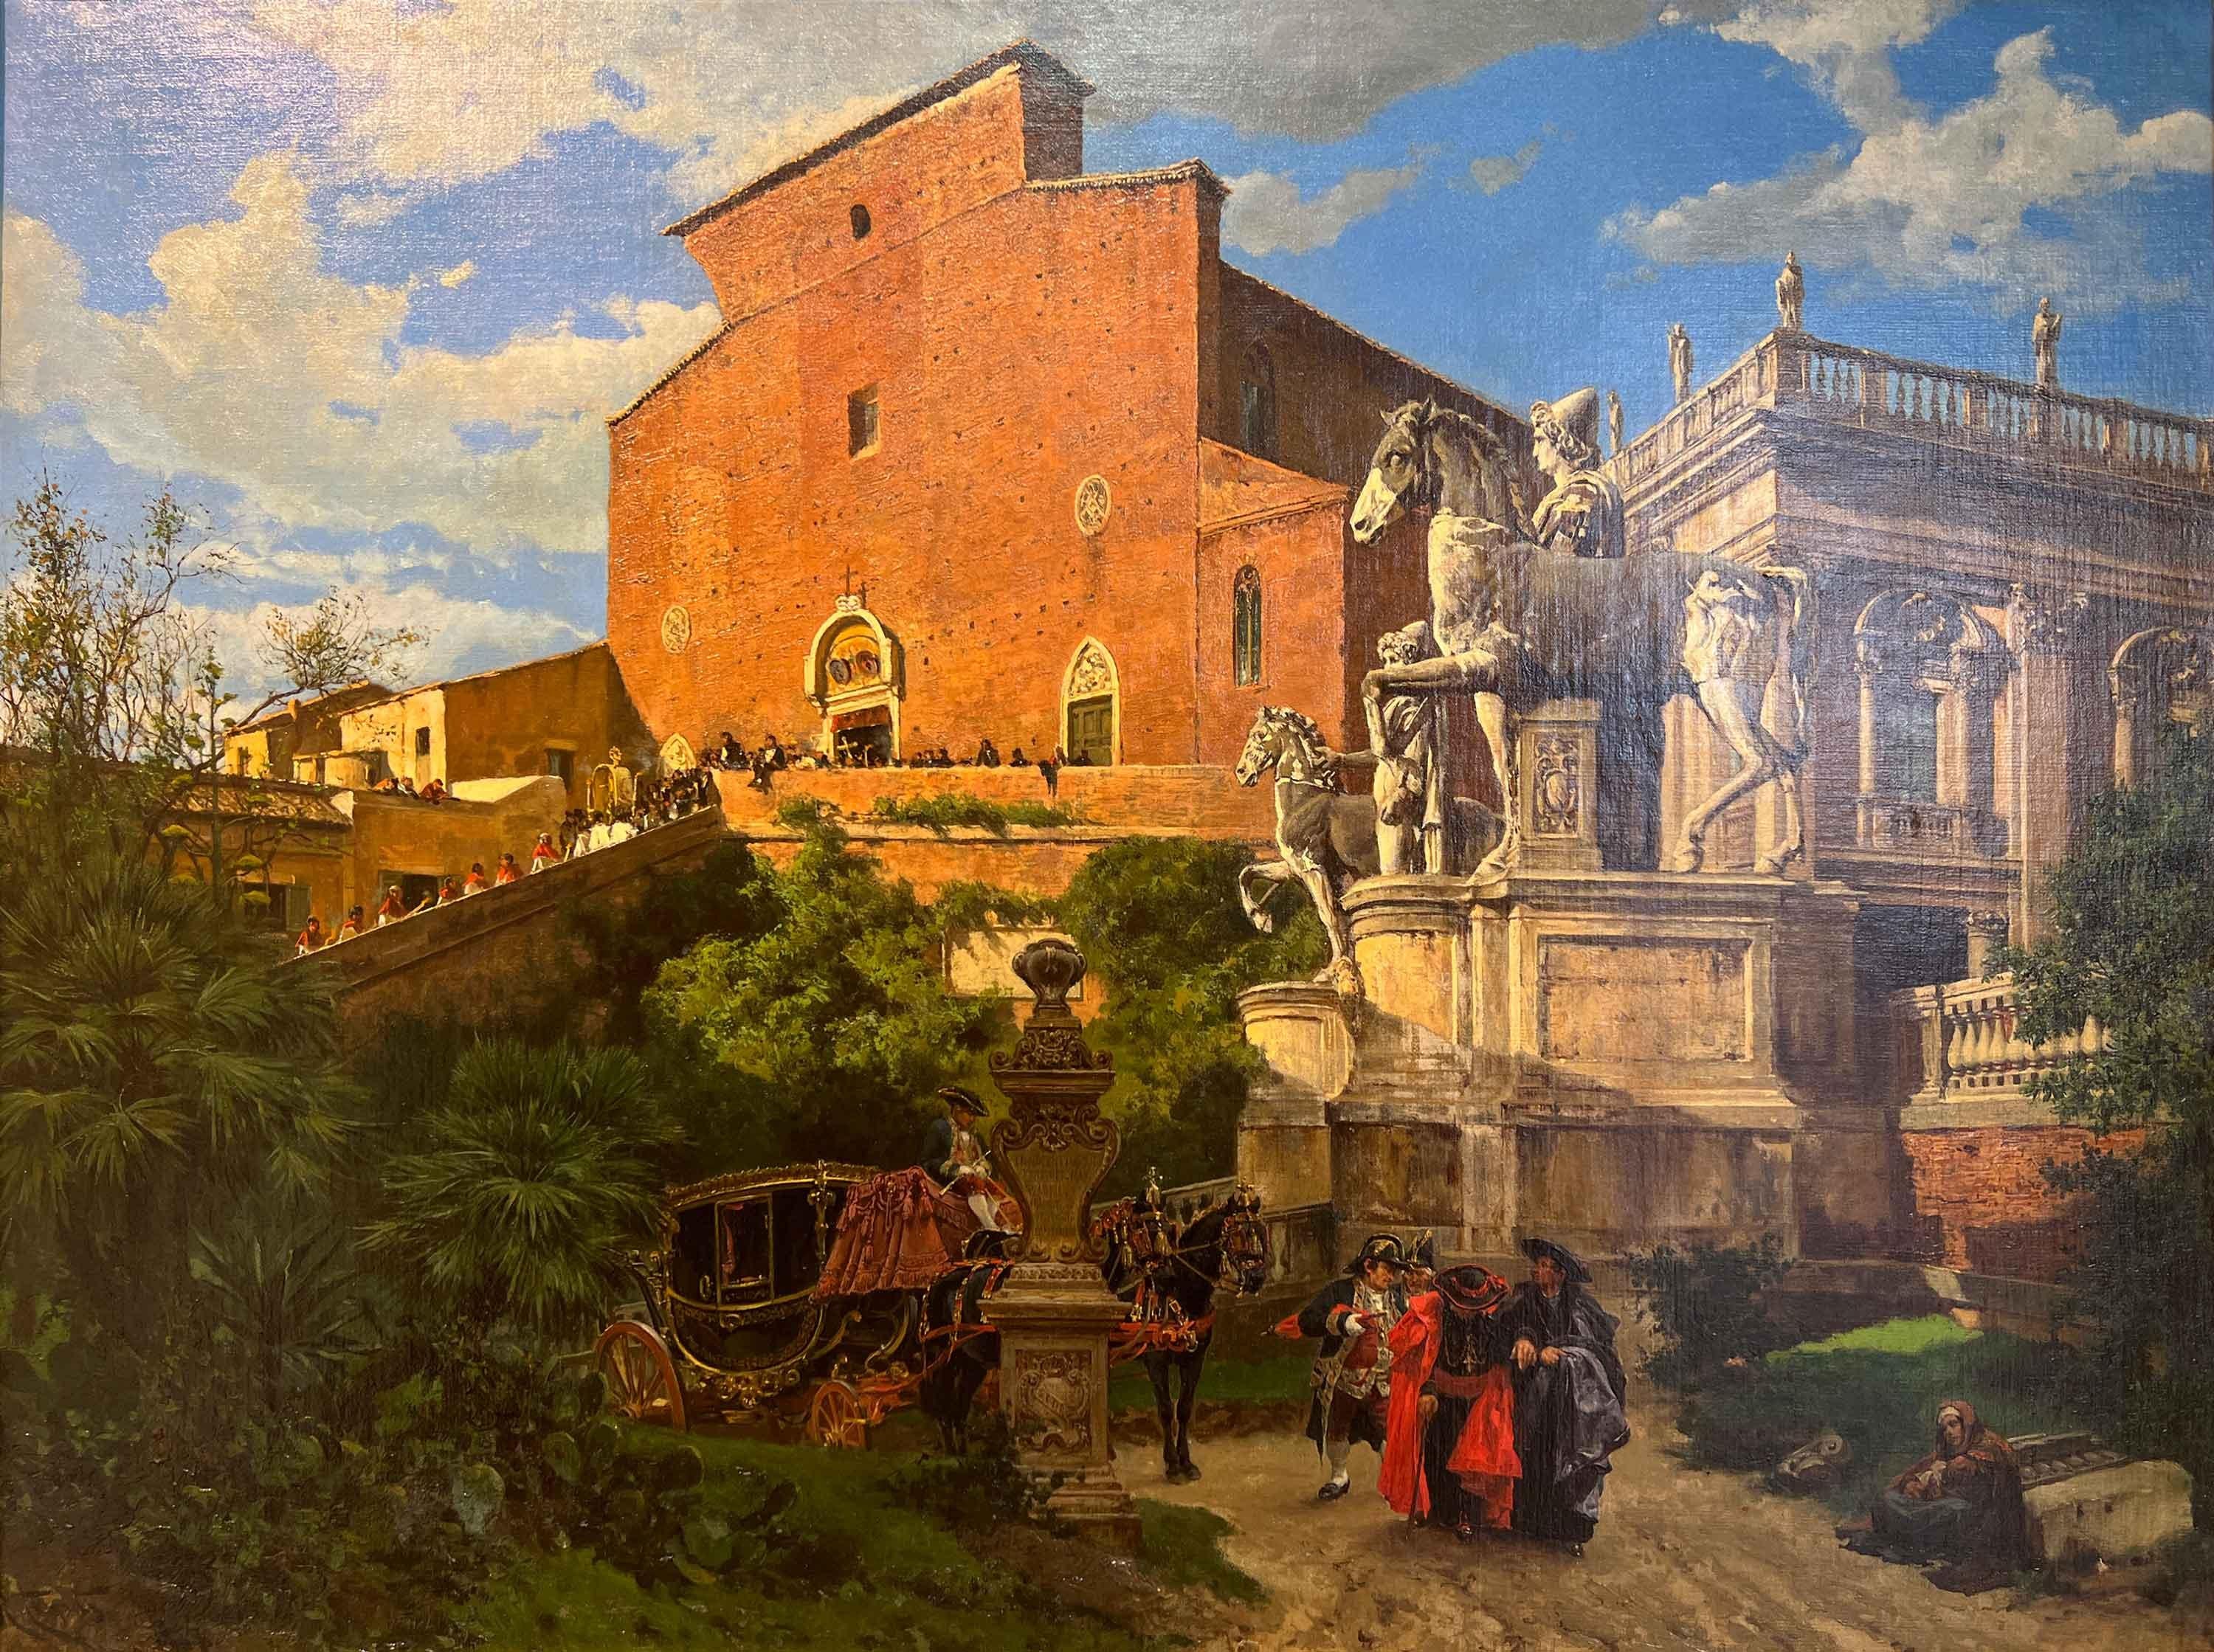 Blessing in Rome of the Holy Child at the Ara Coeli (1887)